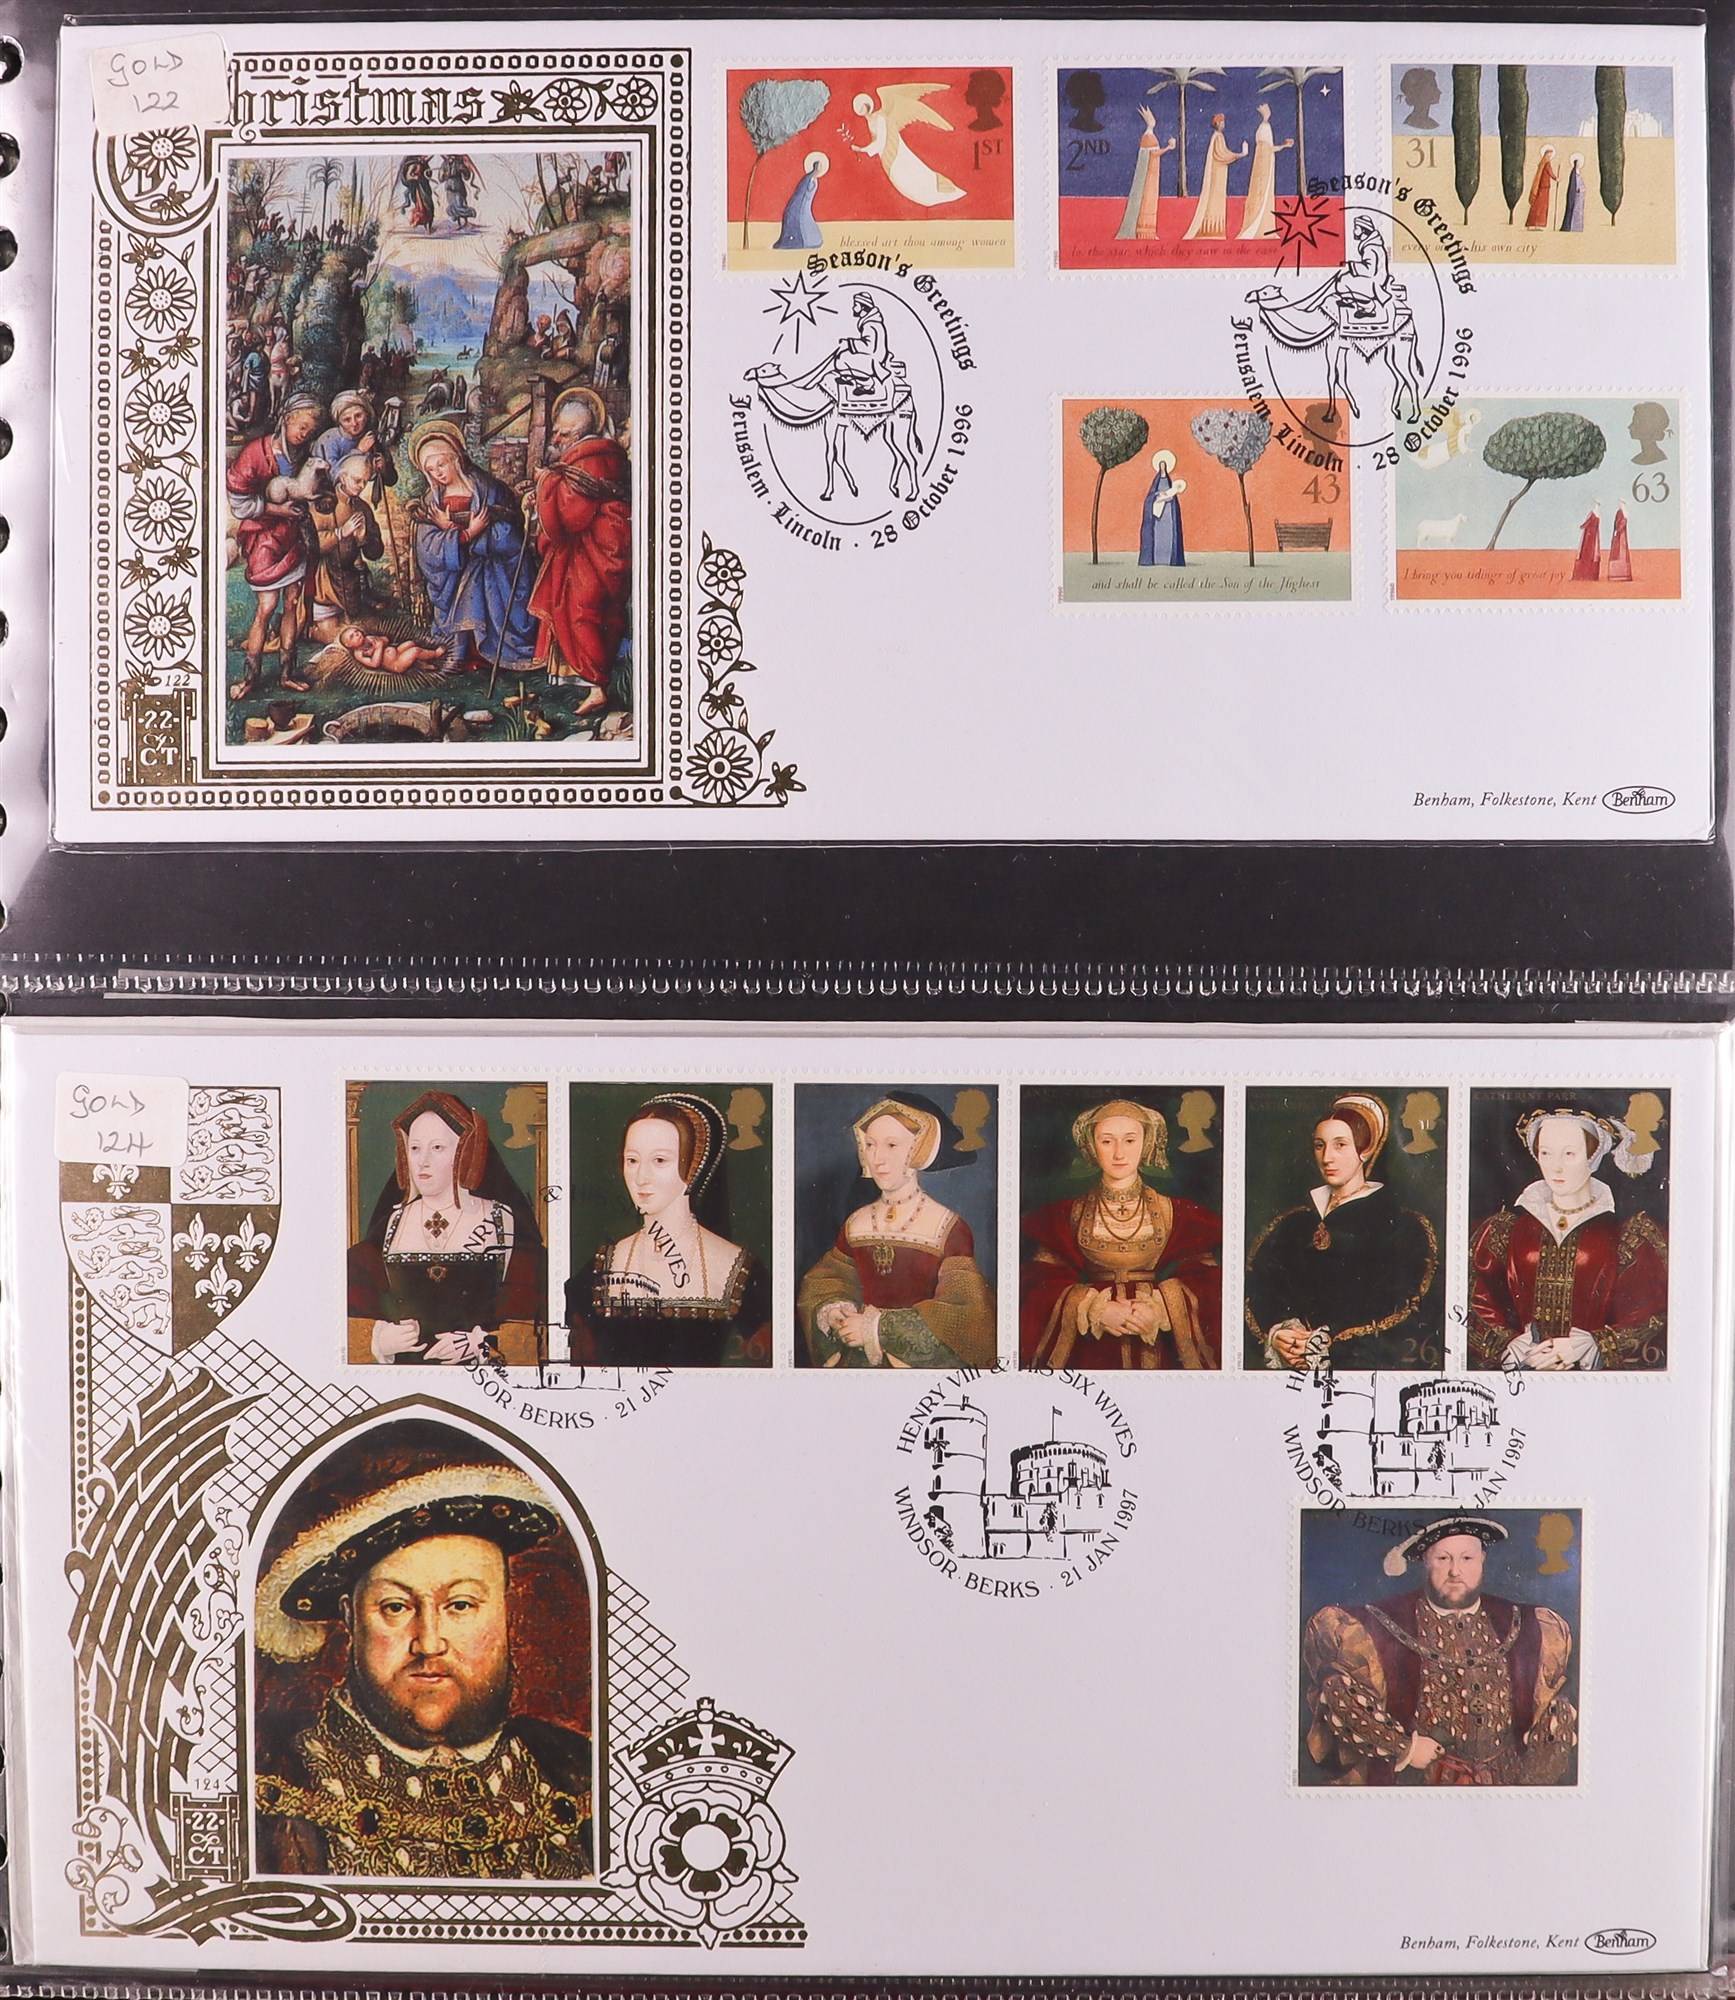 GB. COVERS & POSTAL HISTORY BENHAM 'GOLD 500' COVERS 1994 - 2000 Collection of 40 covers in Benham - Image 2 of 3